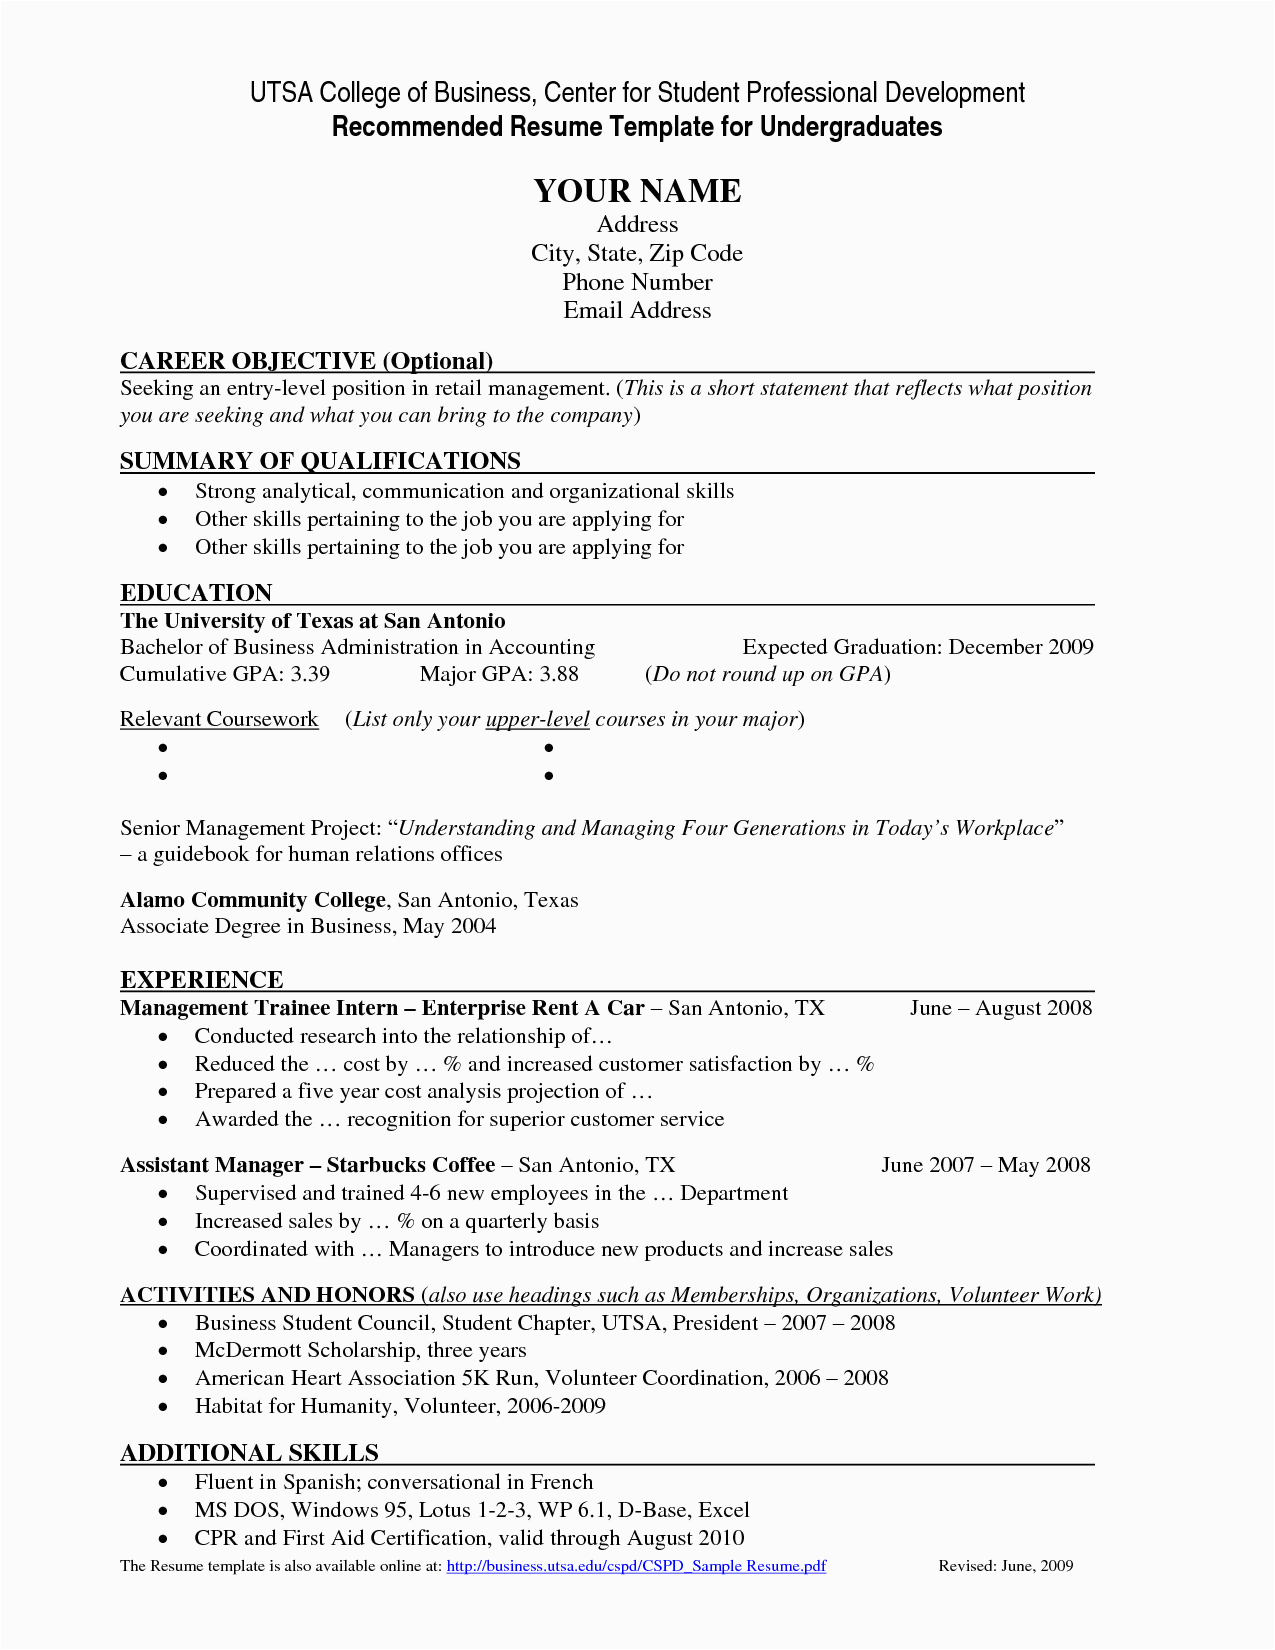 Sample Resume for Students Applying to University Resume Template for College Students